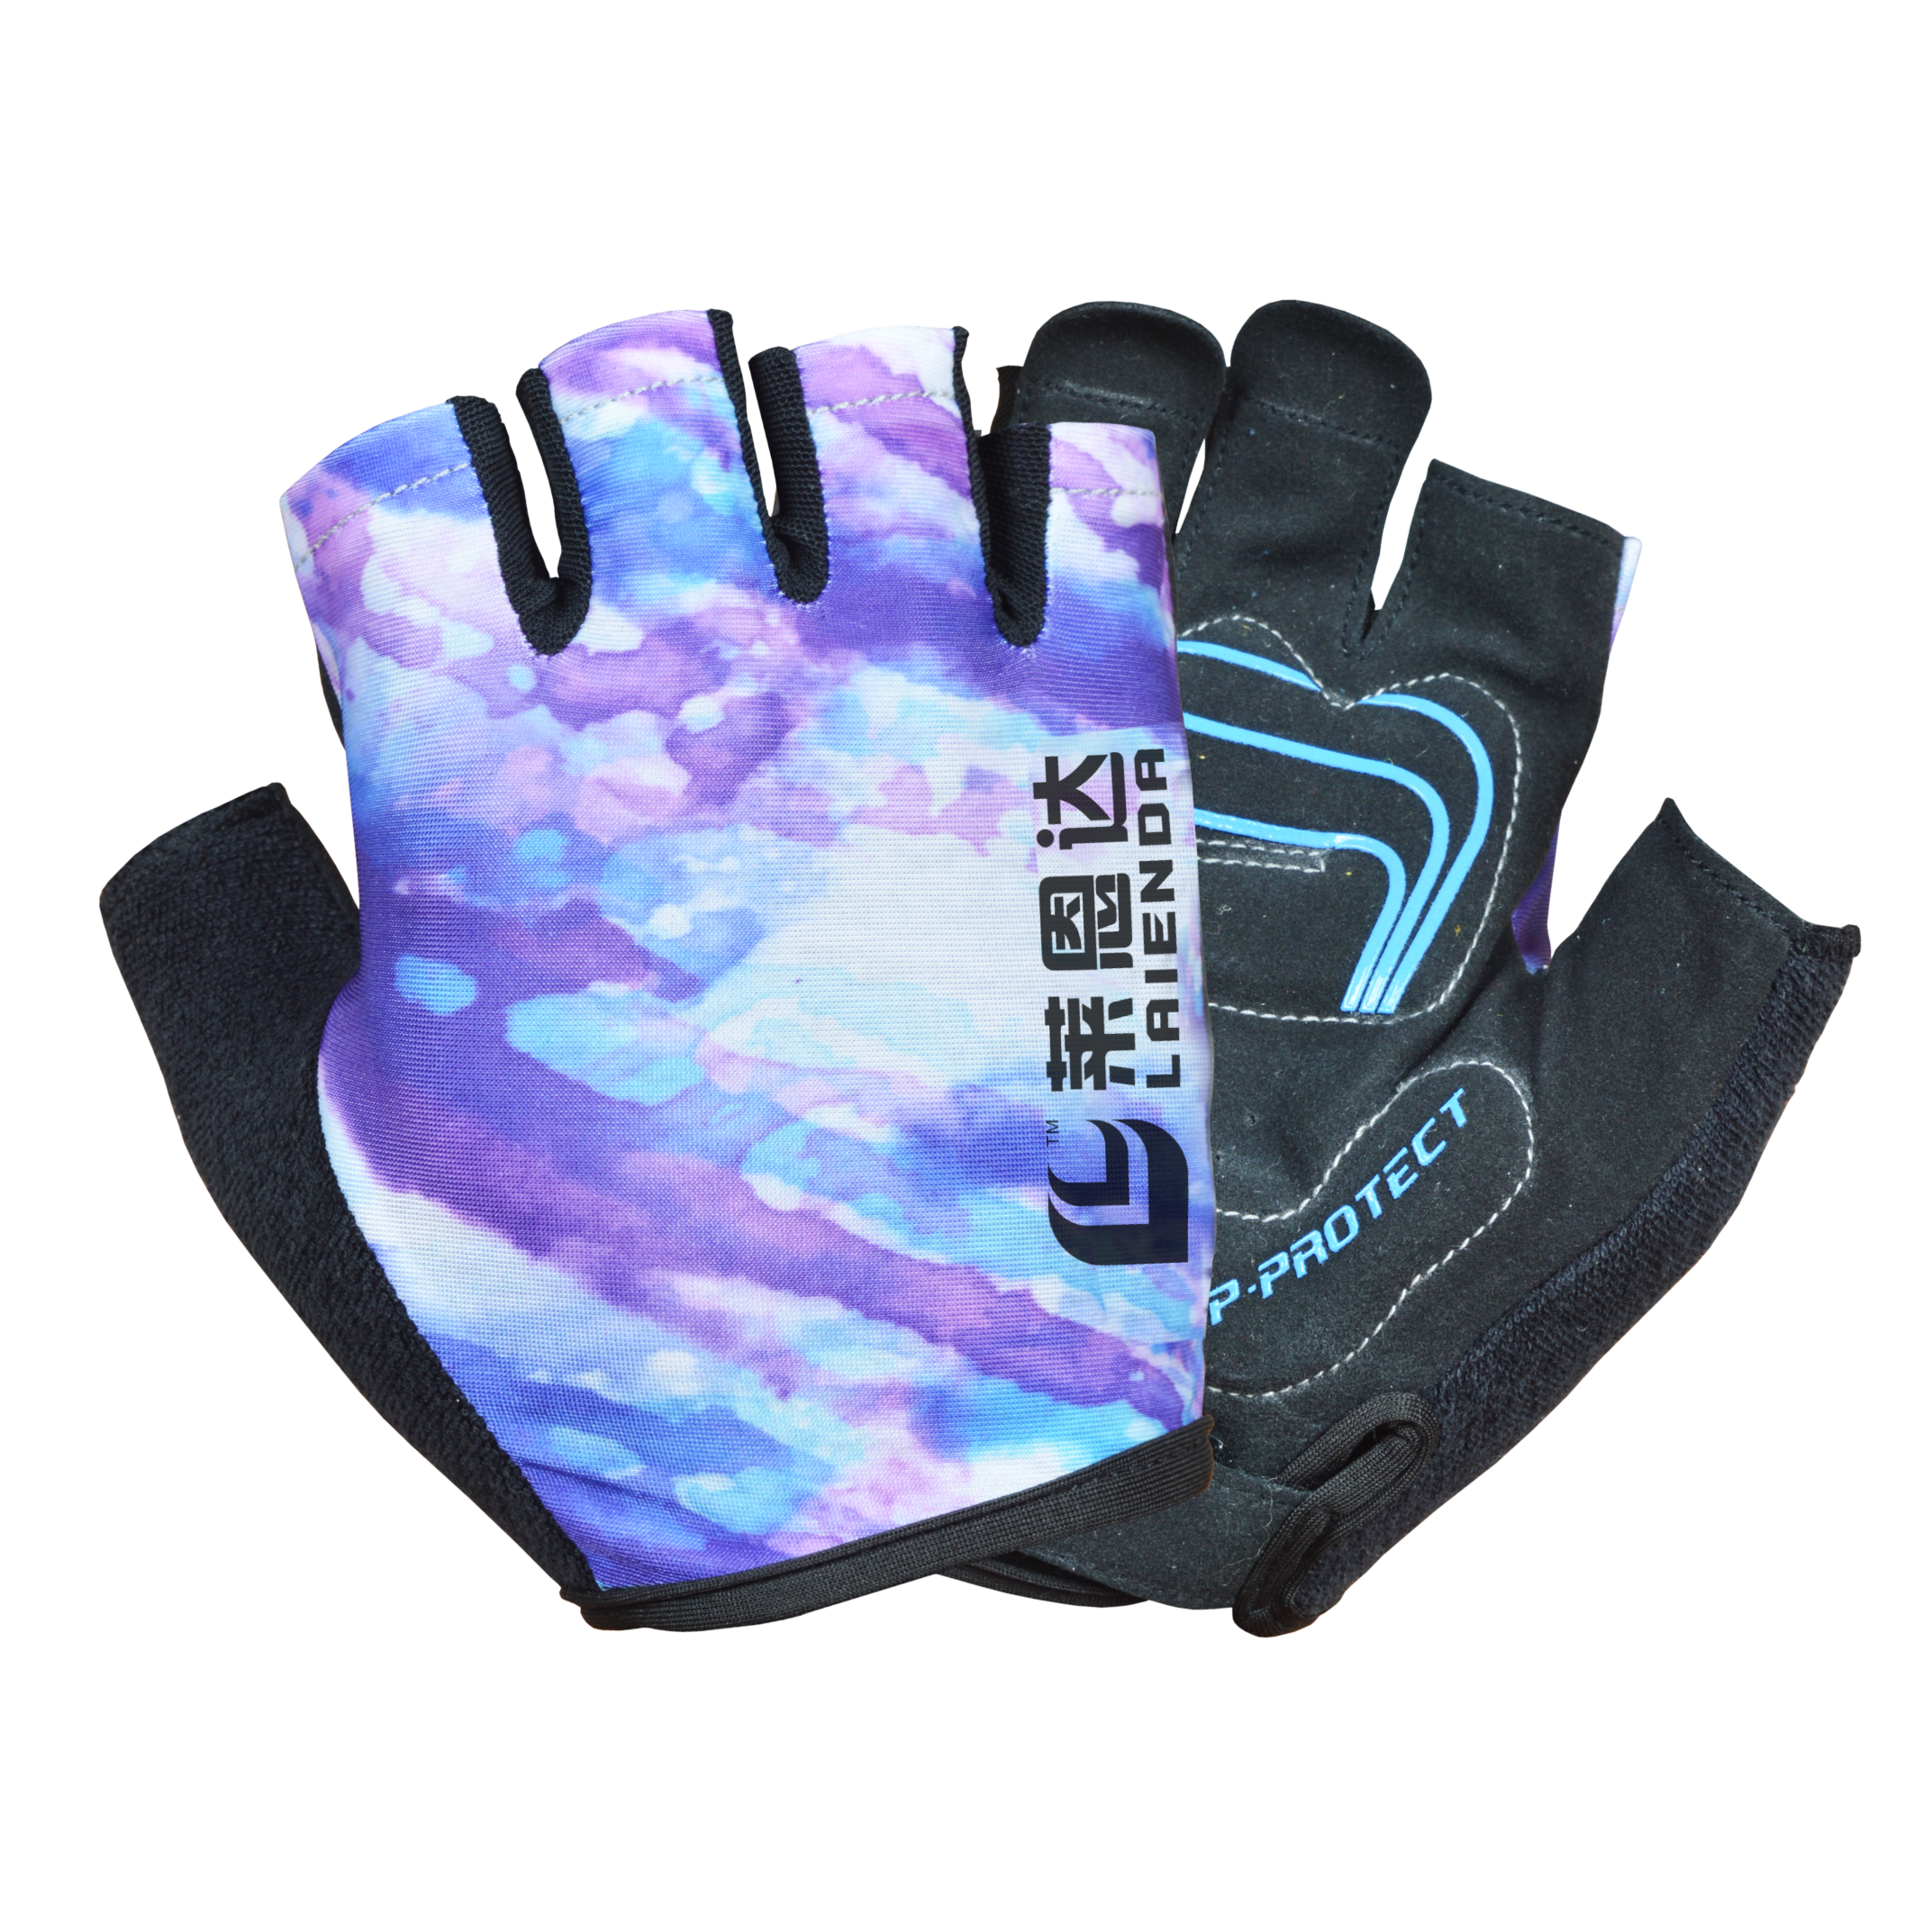 Breathable half-finger cycling gloves